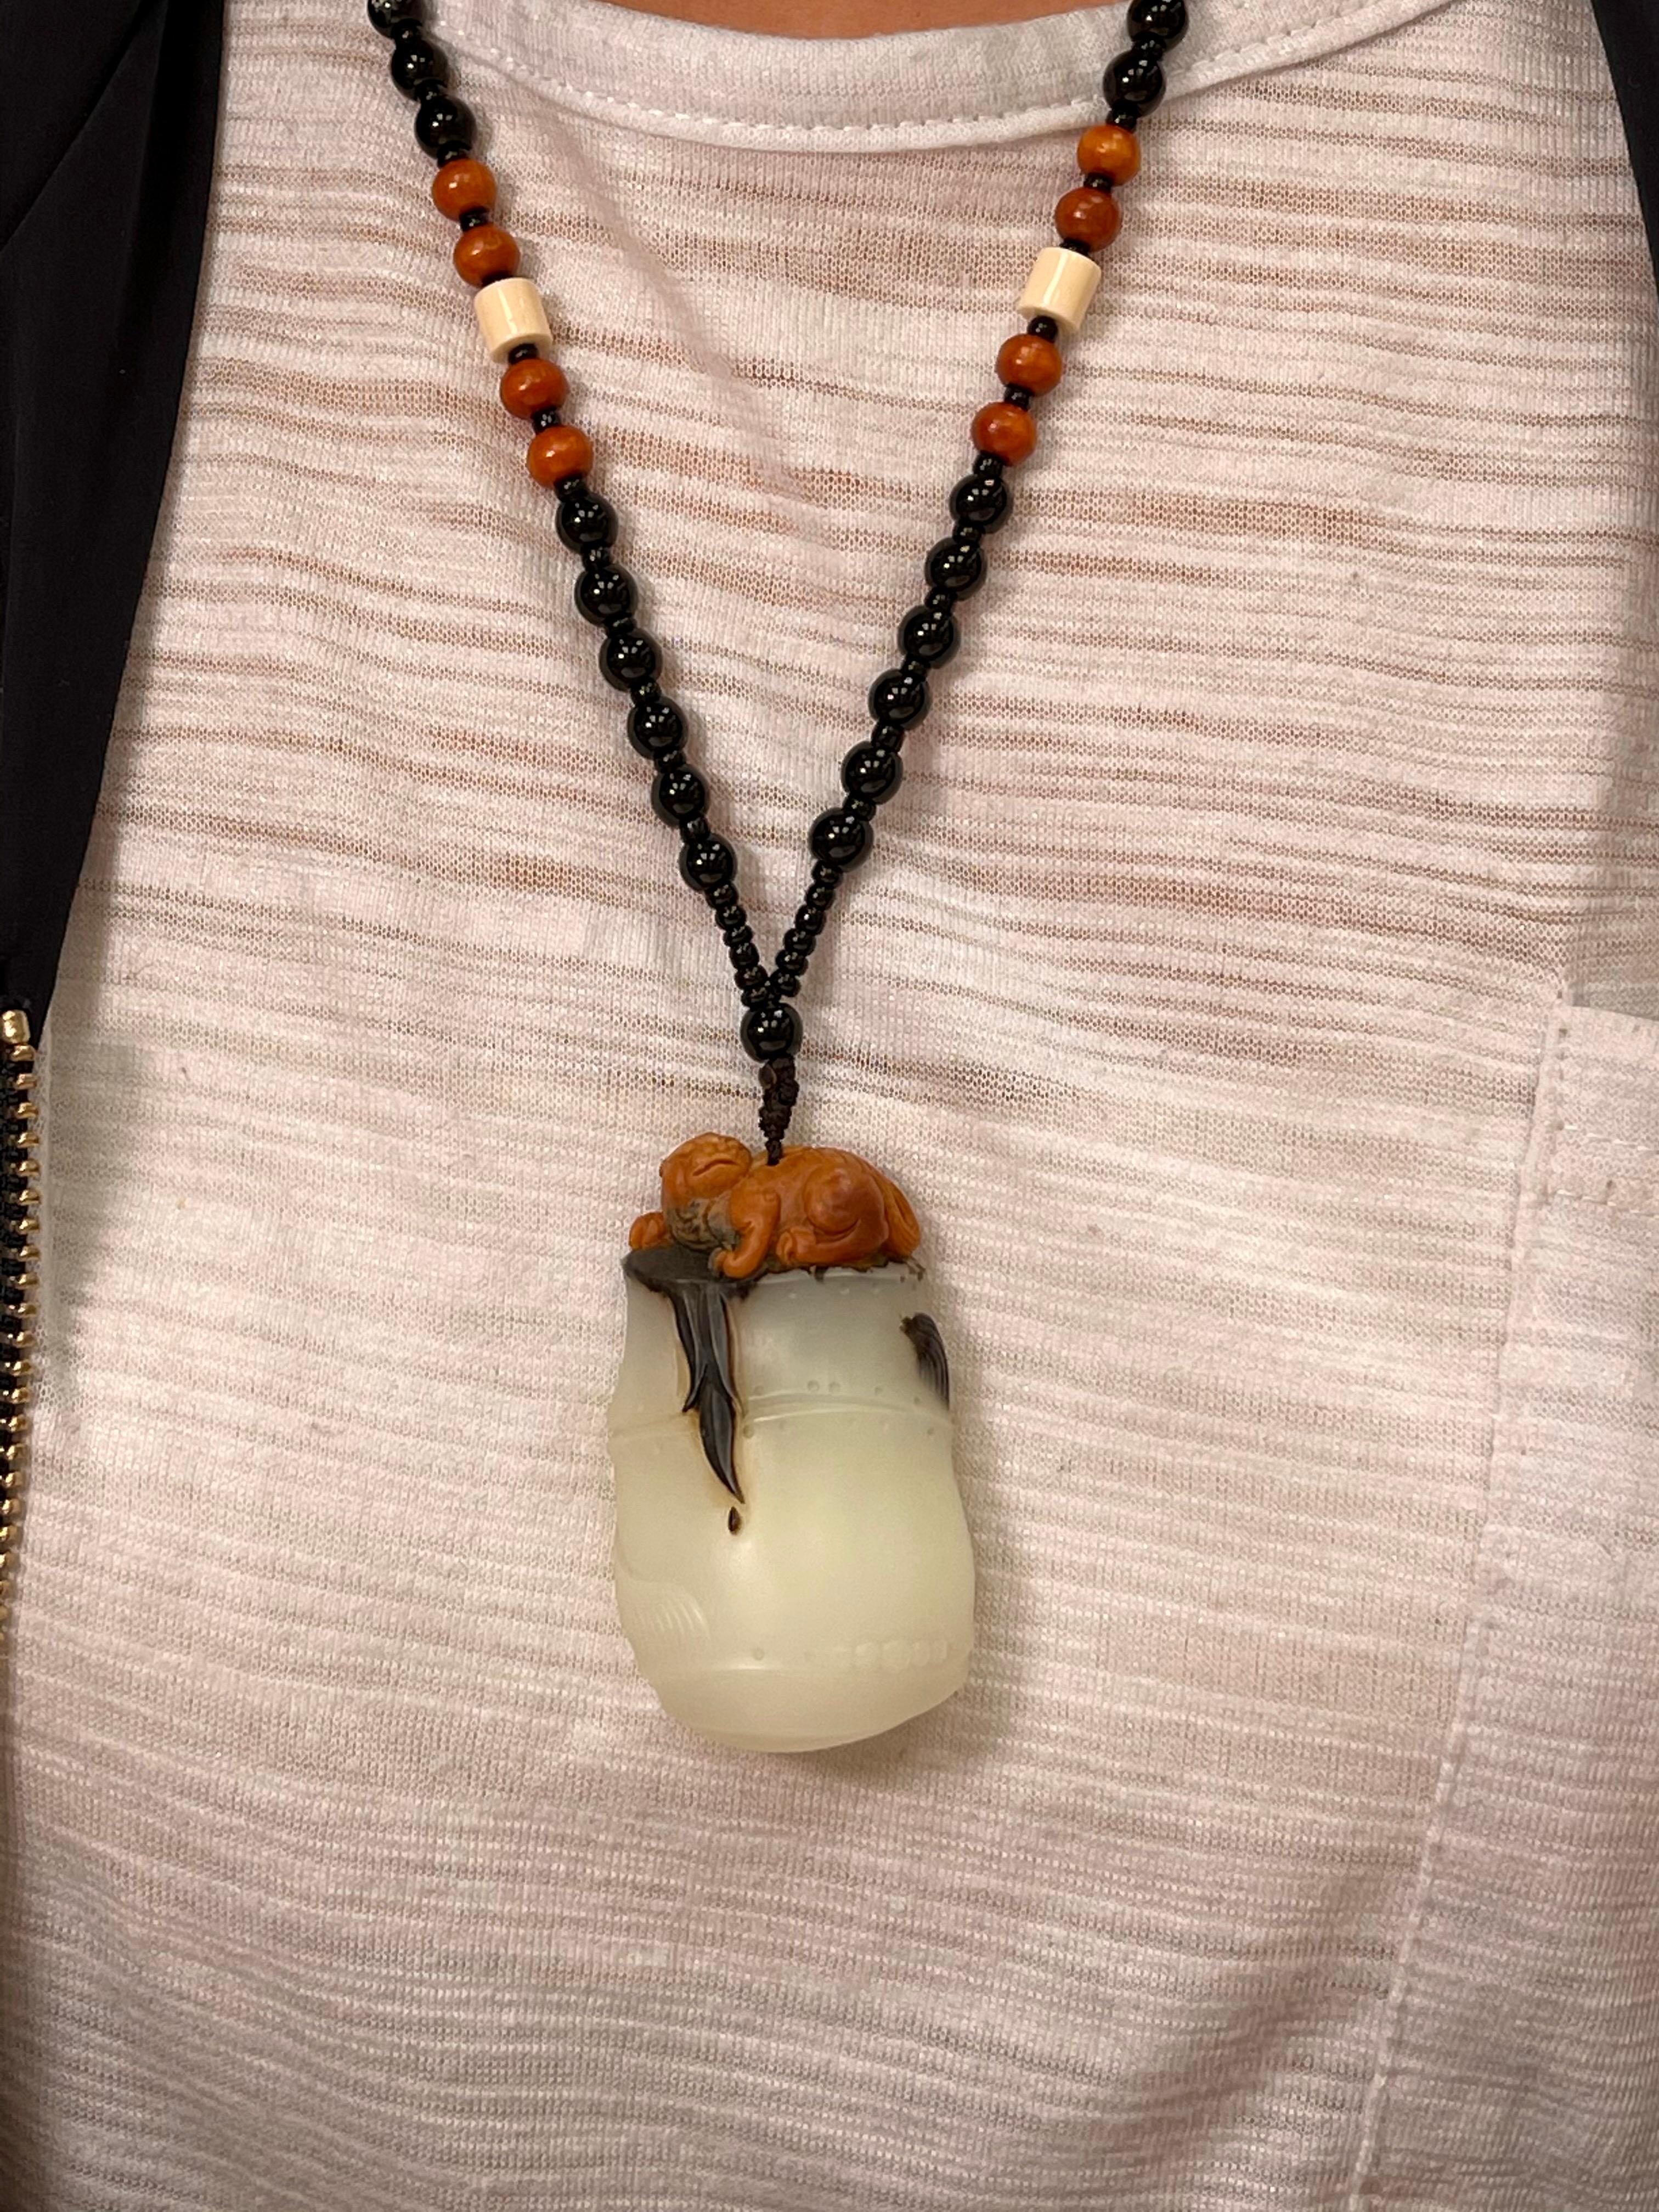 This master piece is certified natural nephrite jade 